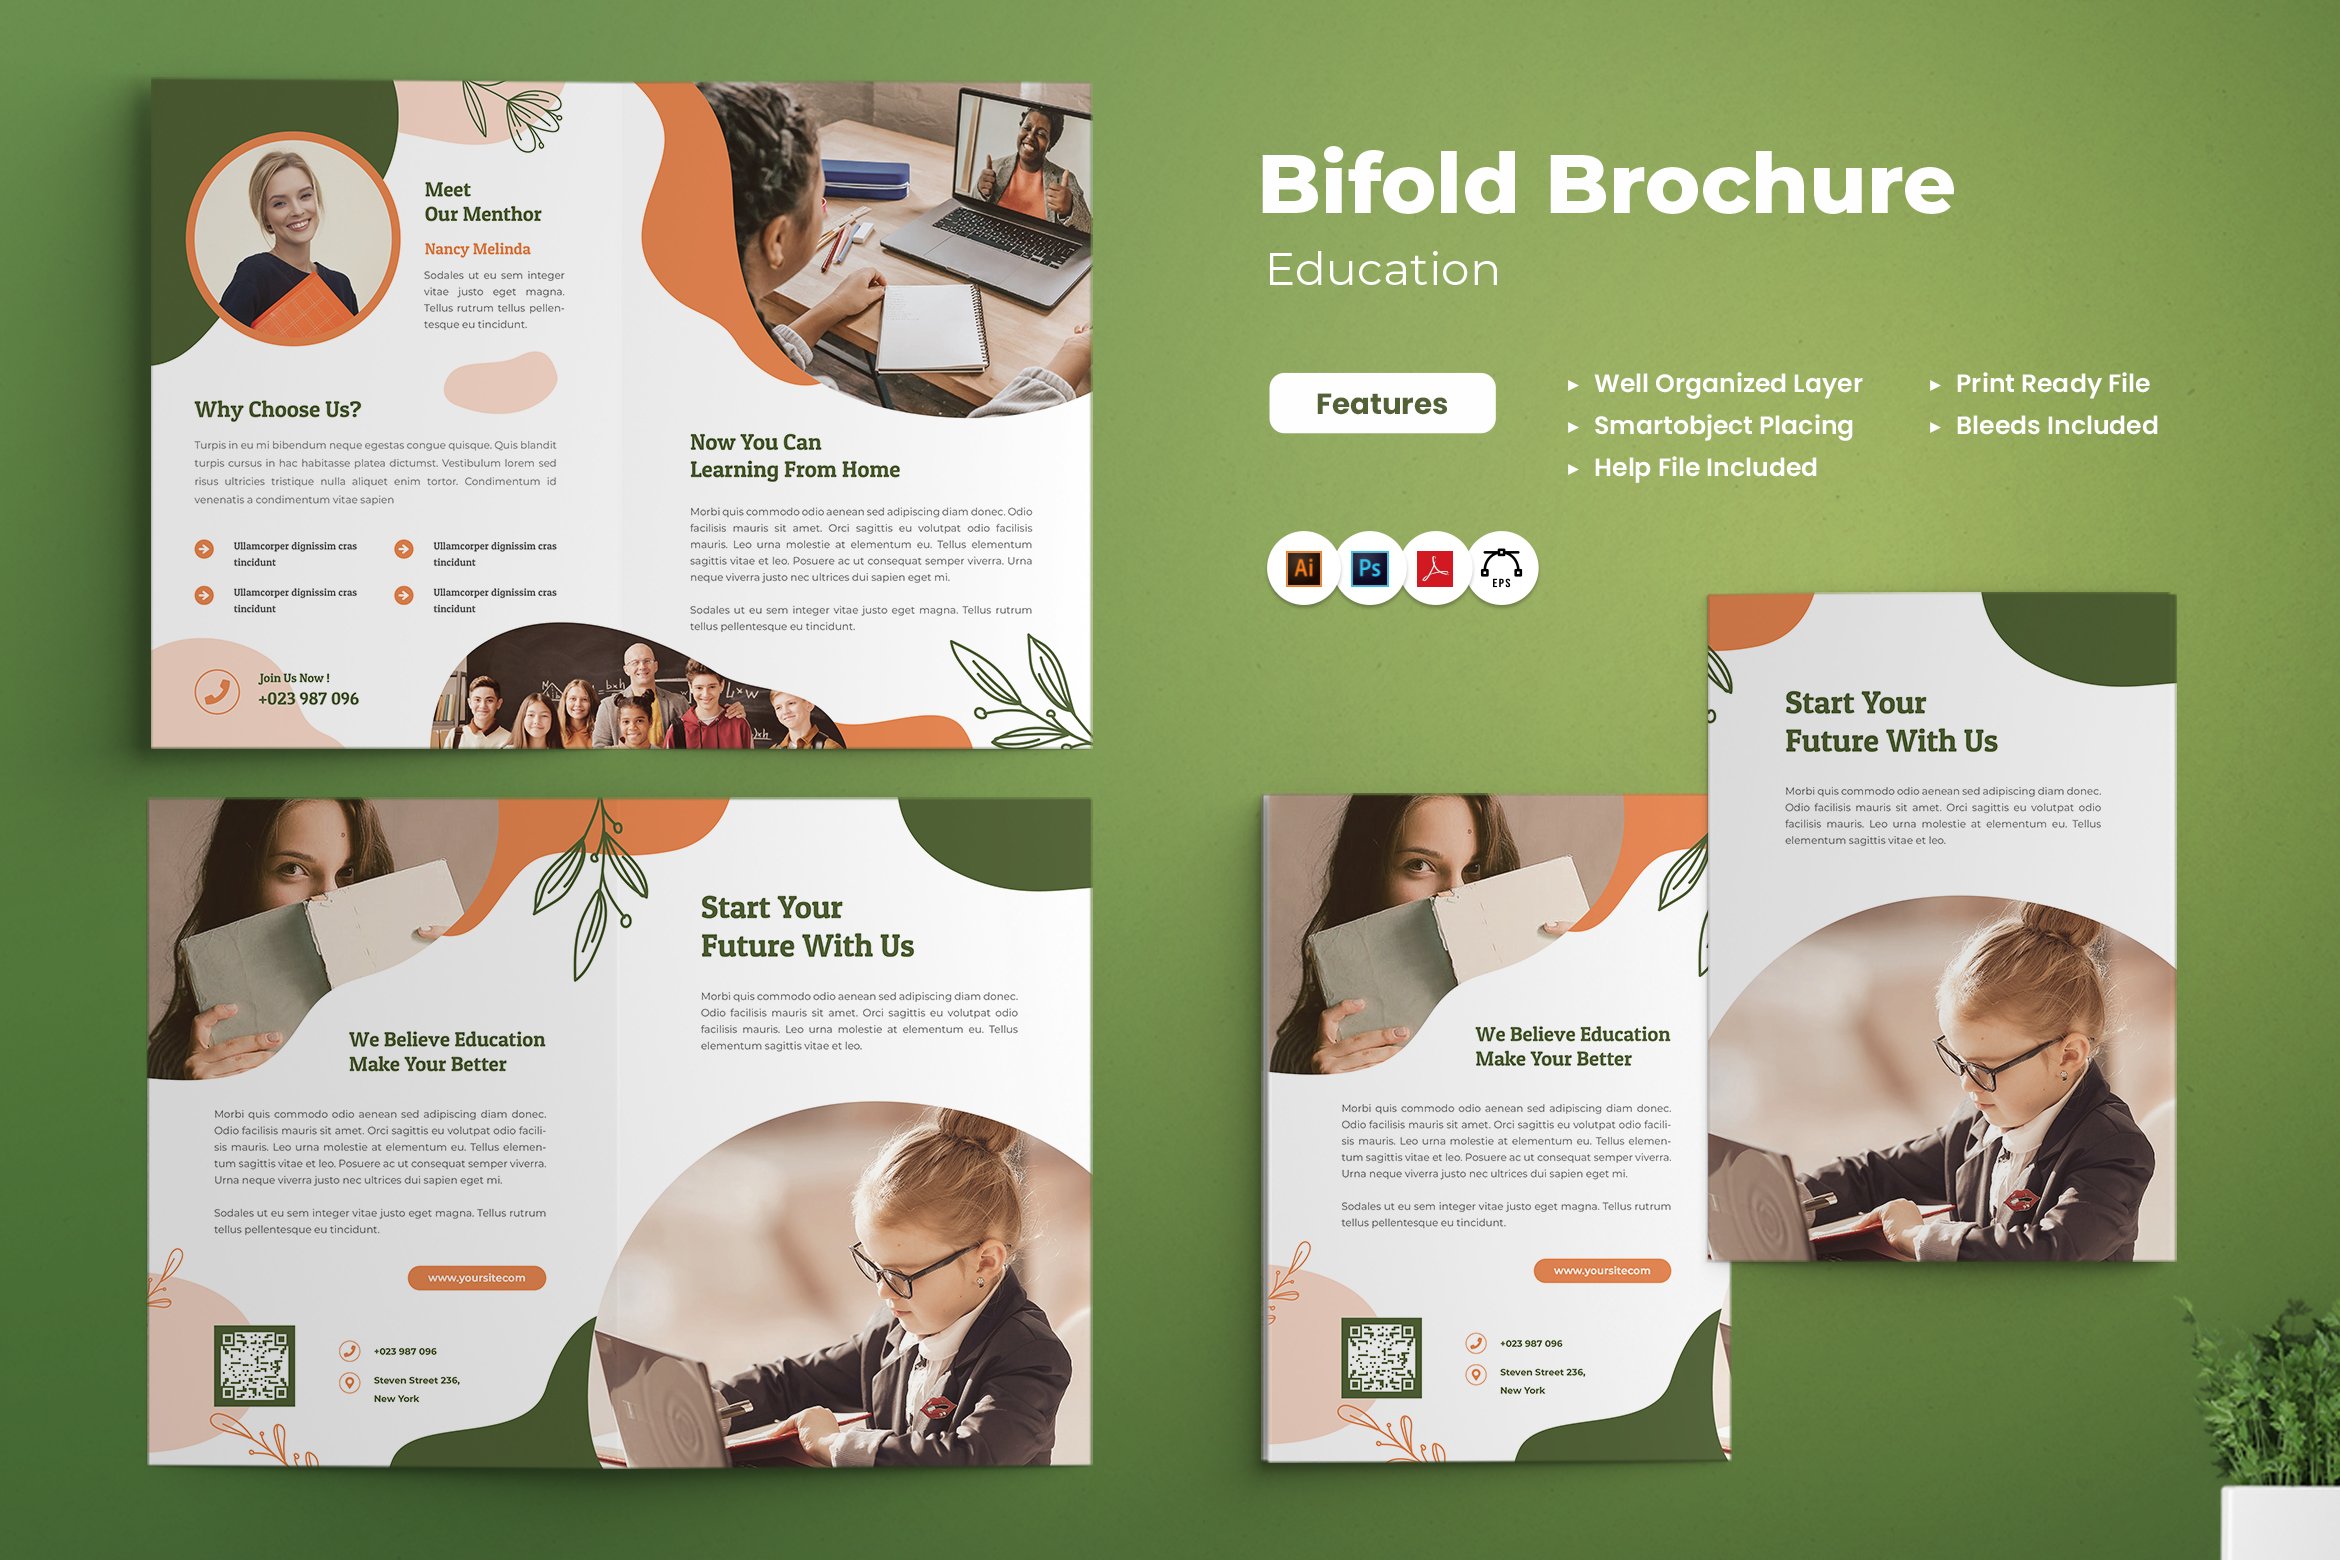 Education Bifold Brochure cover image.